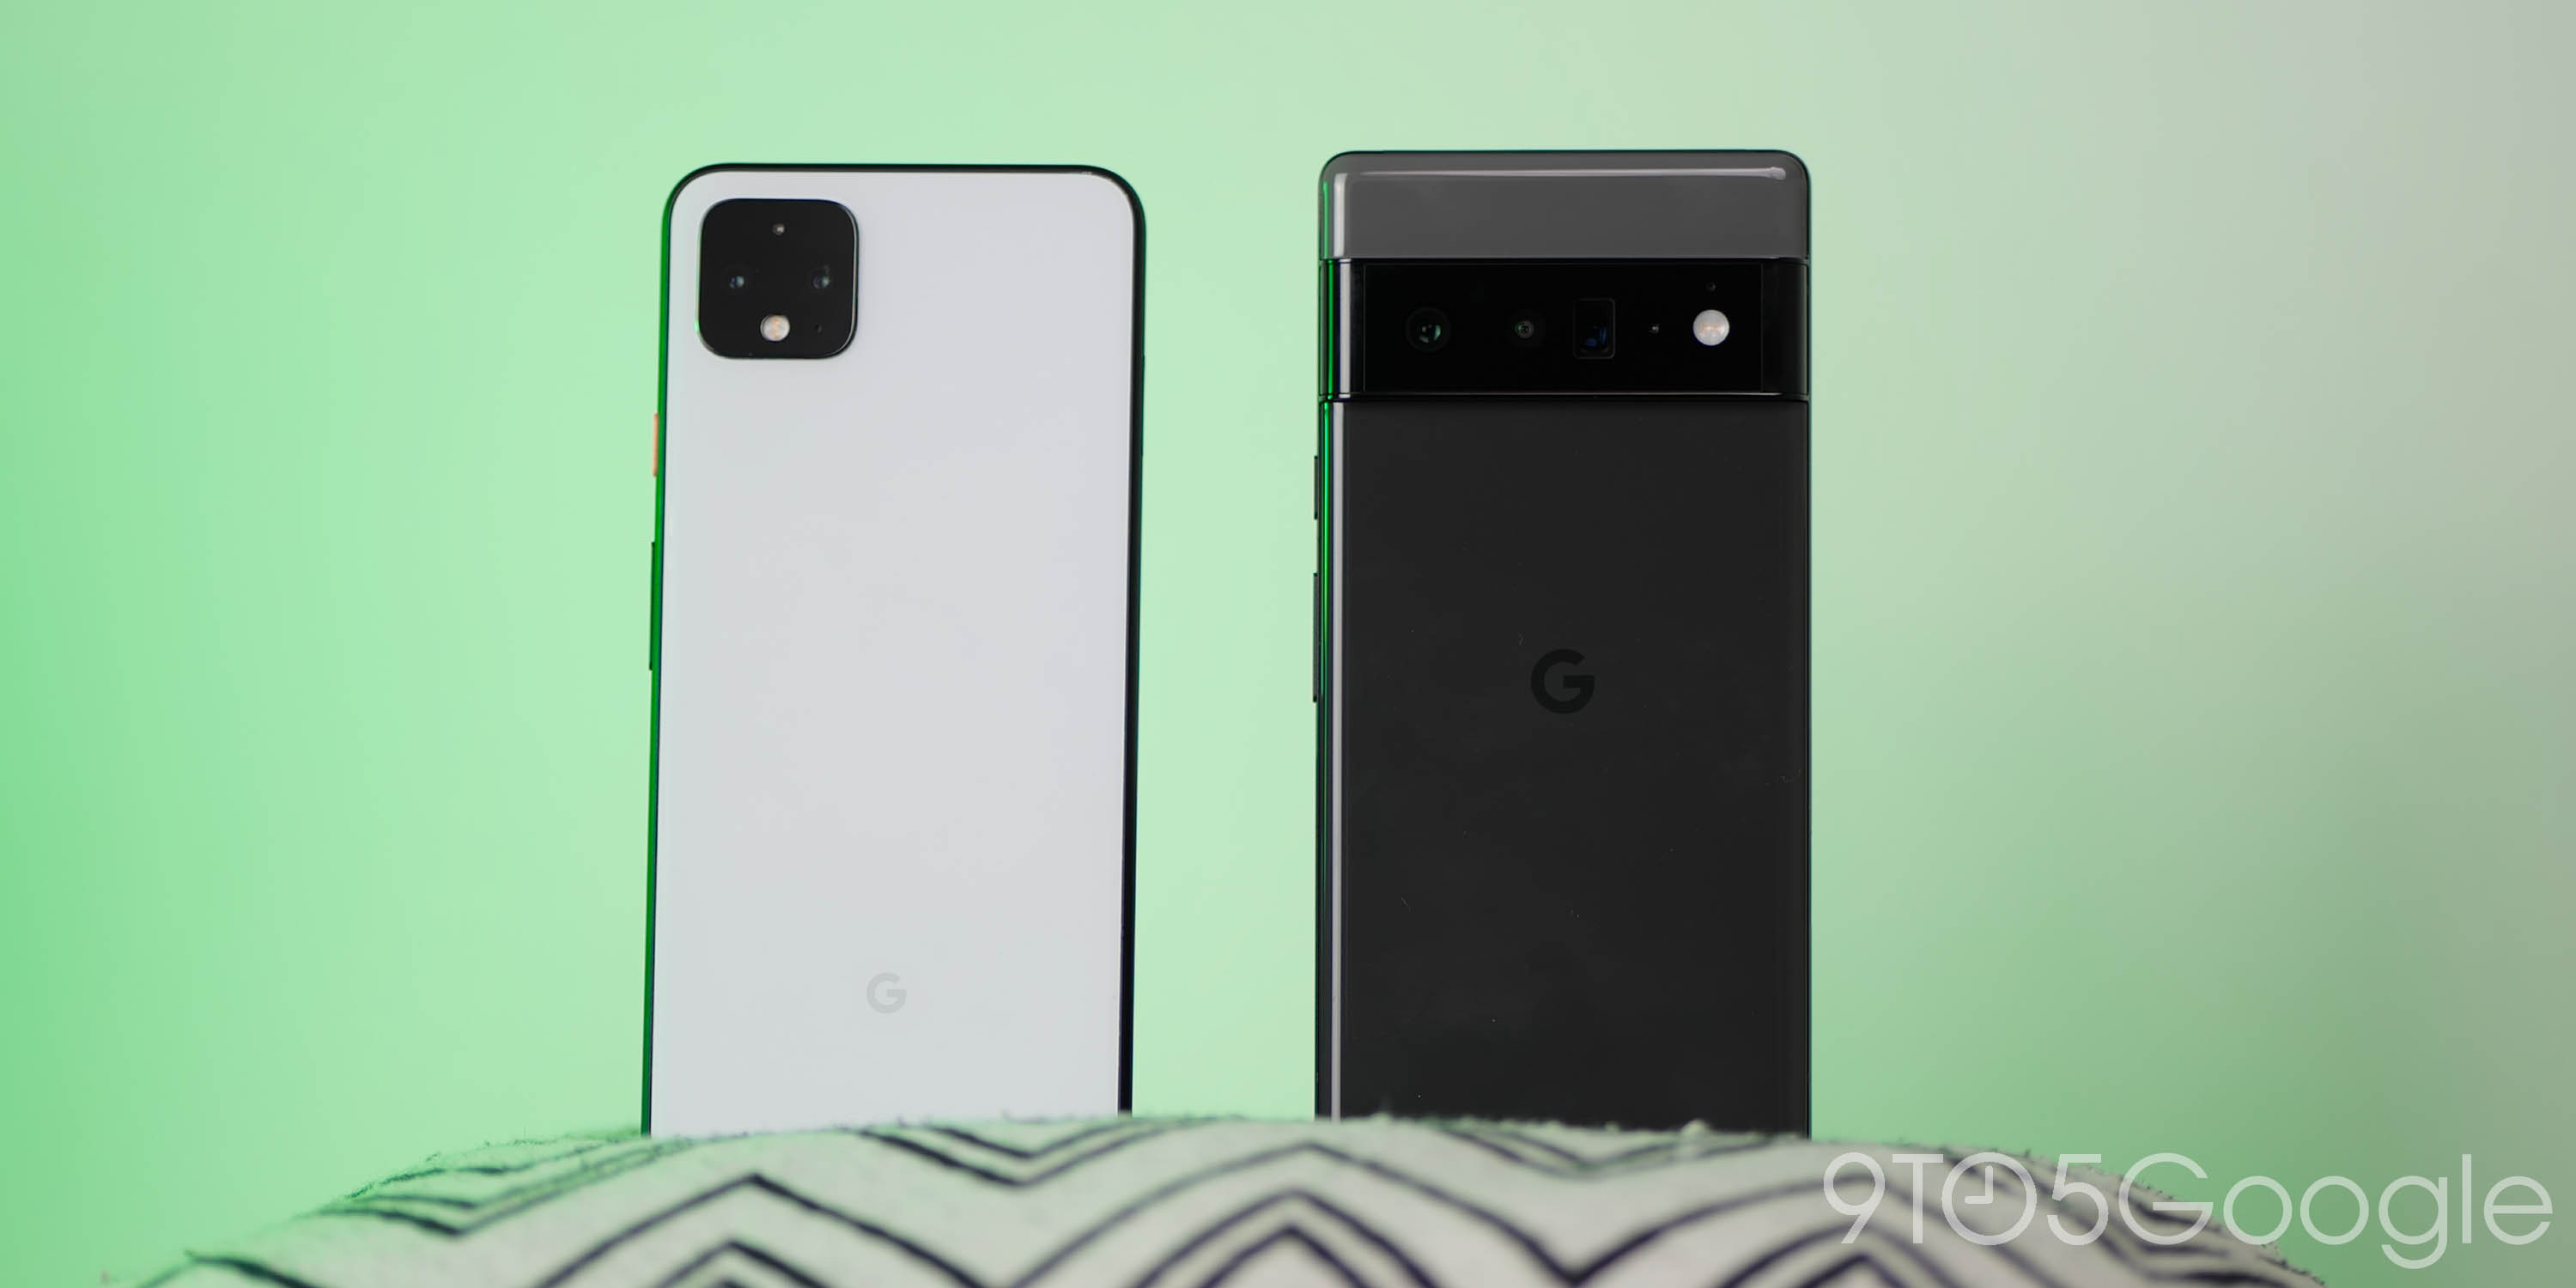 Pixel 6 or Pixel 6 Pro? Some real-world guidance that might